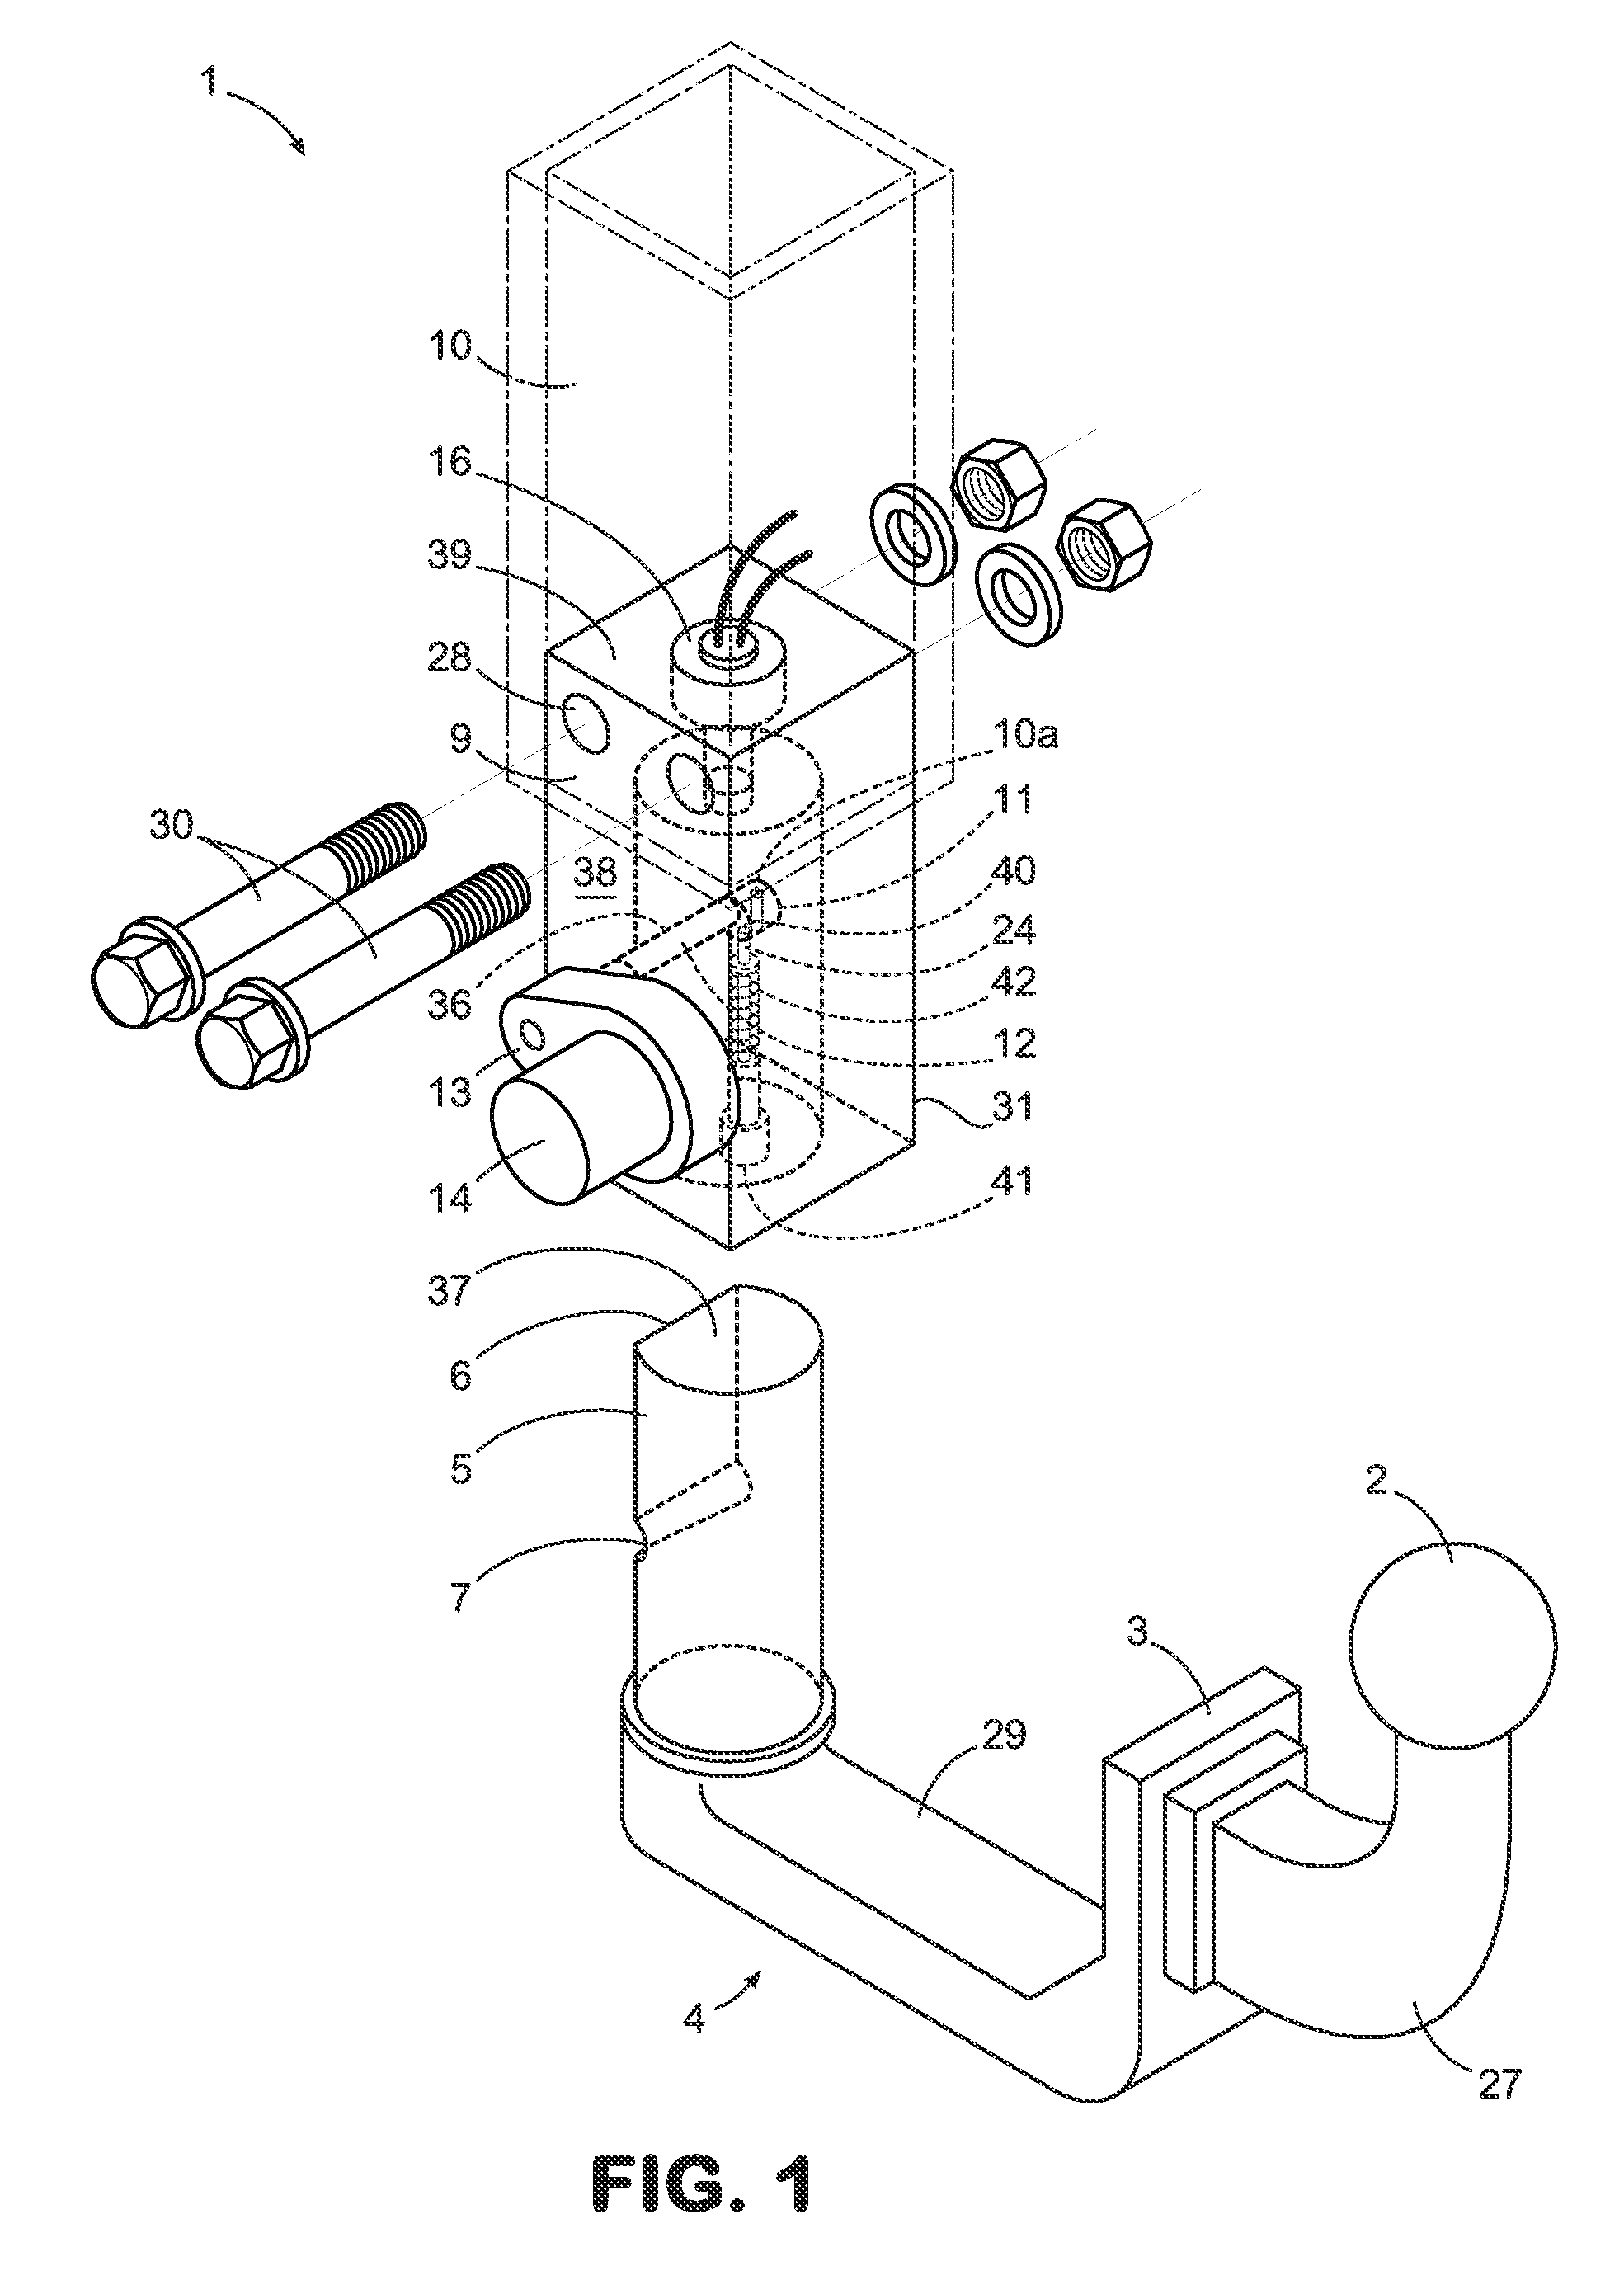 Electronically controlled tow hitch assembly